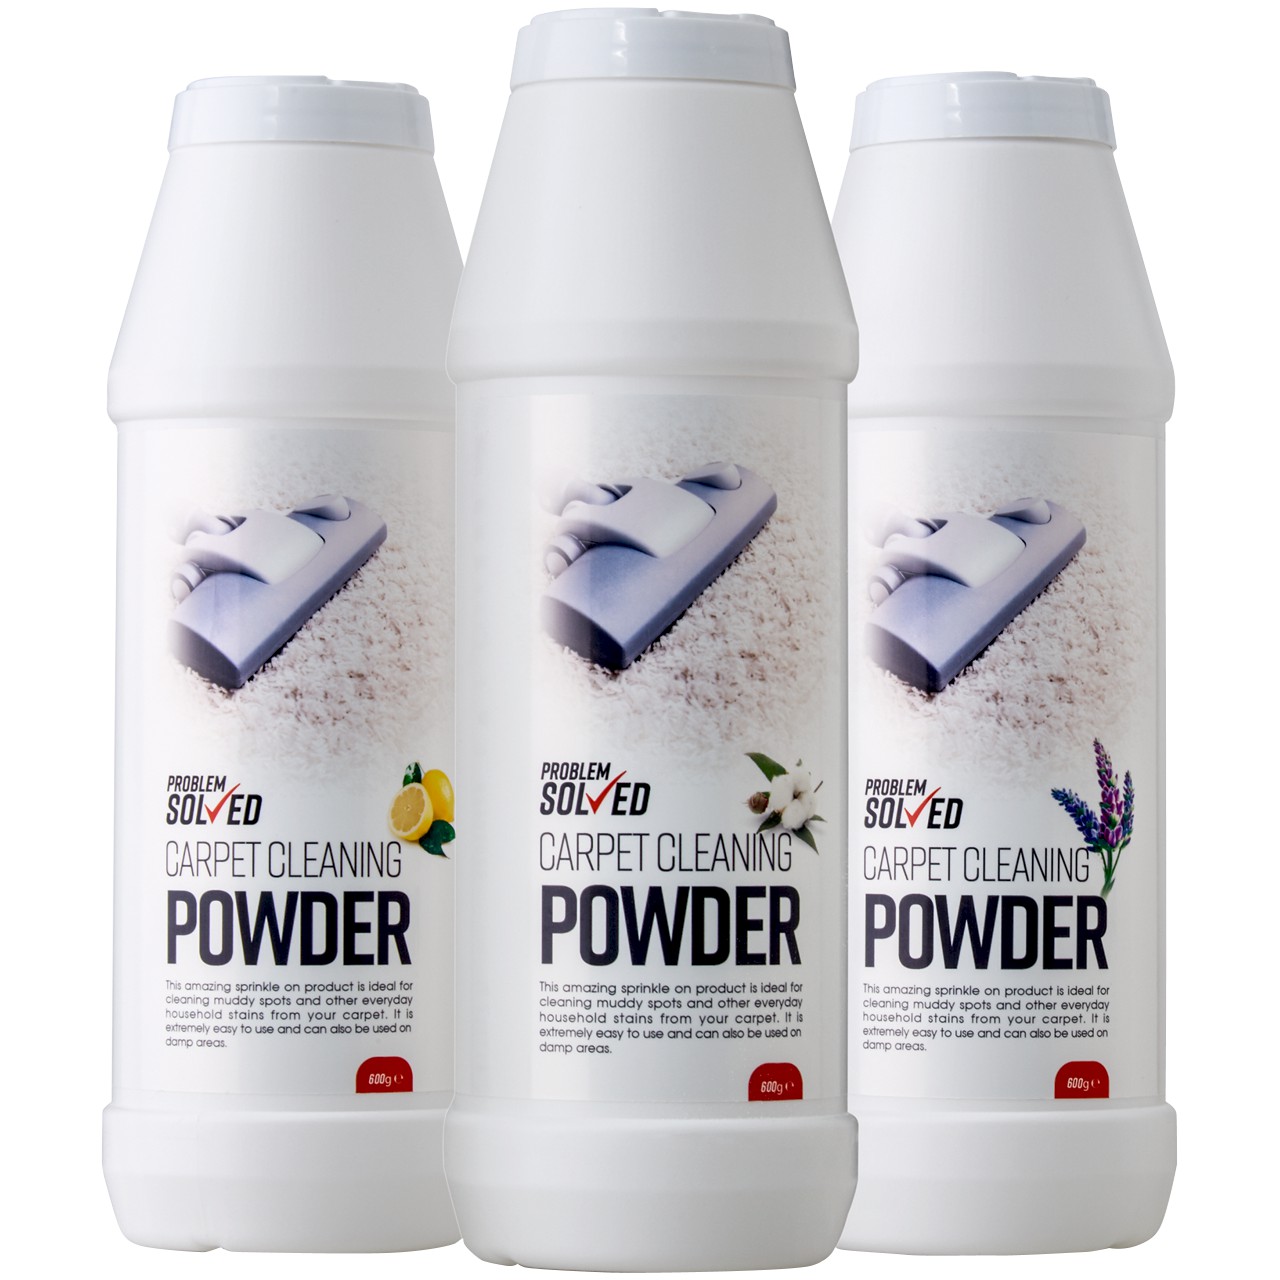 Carpet Cleaning Powder - Pack of 2